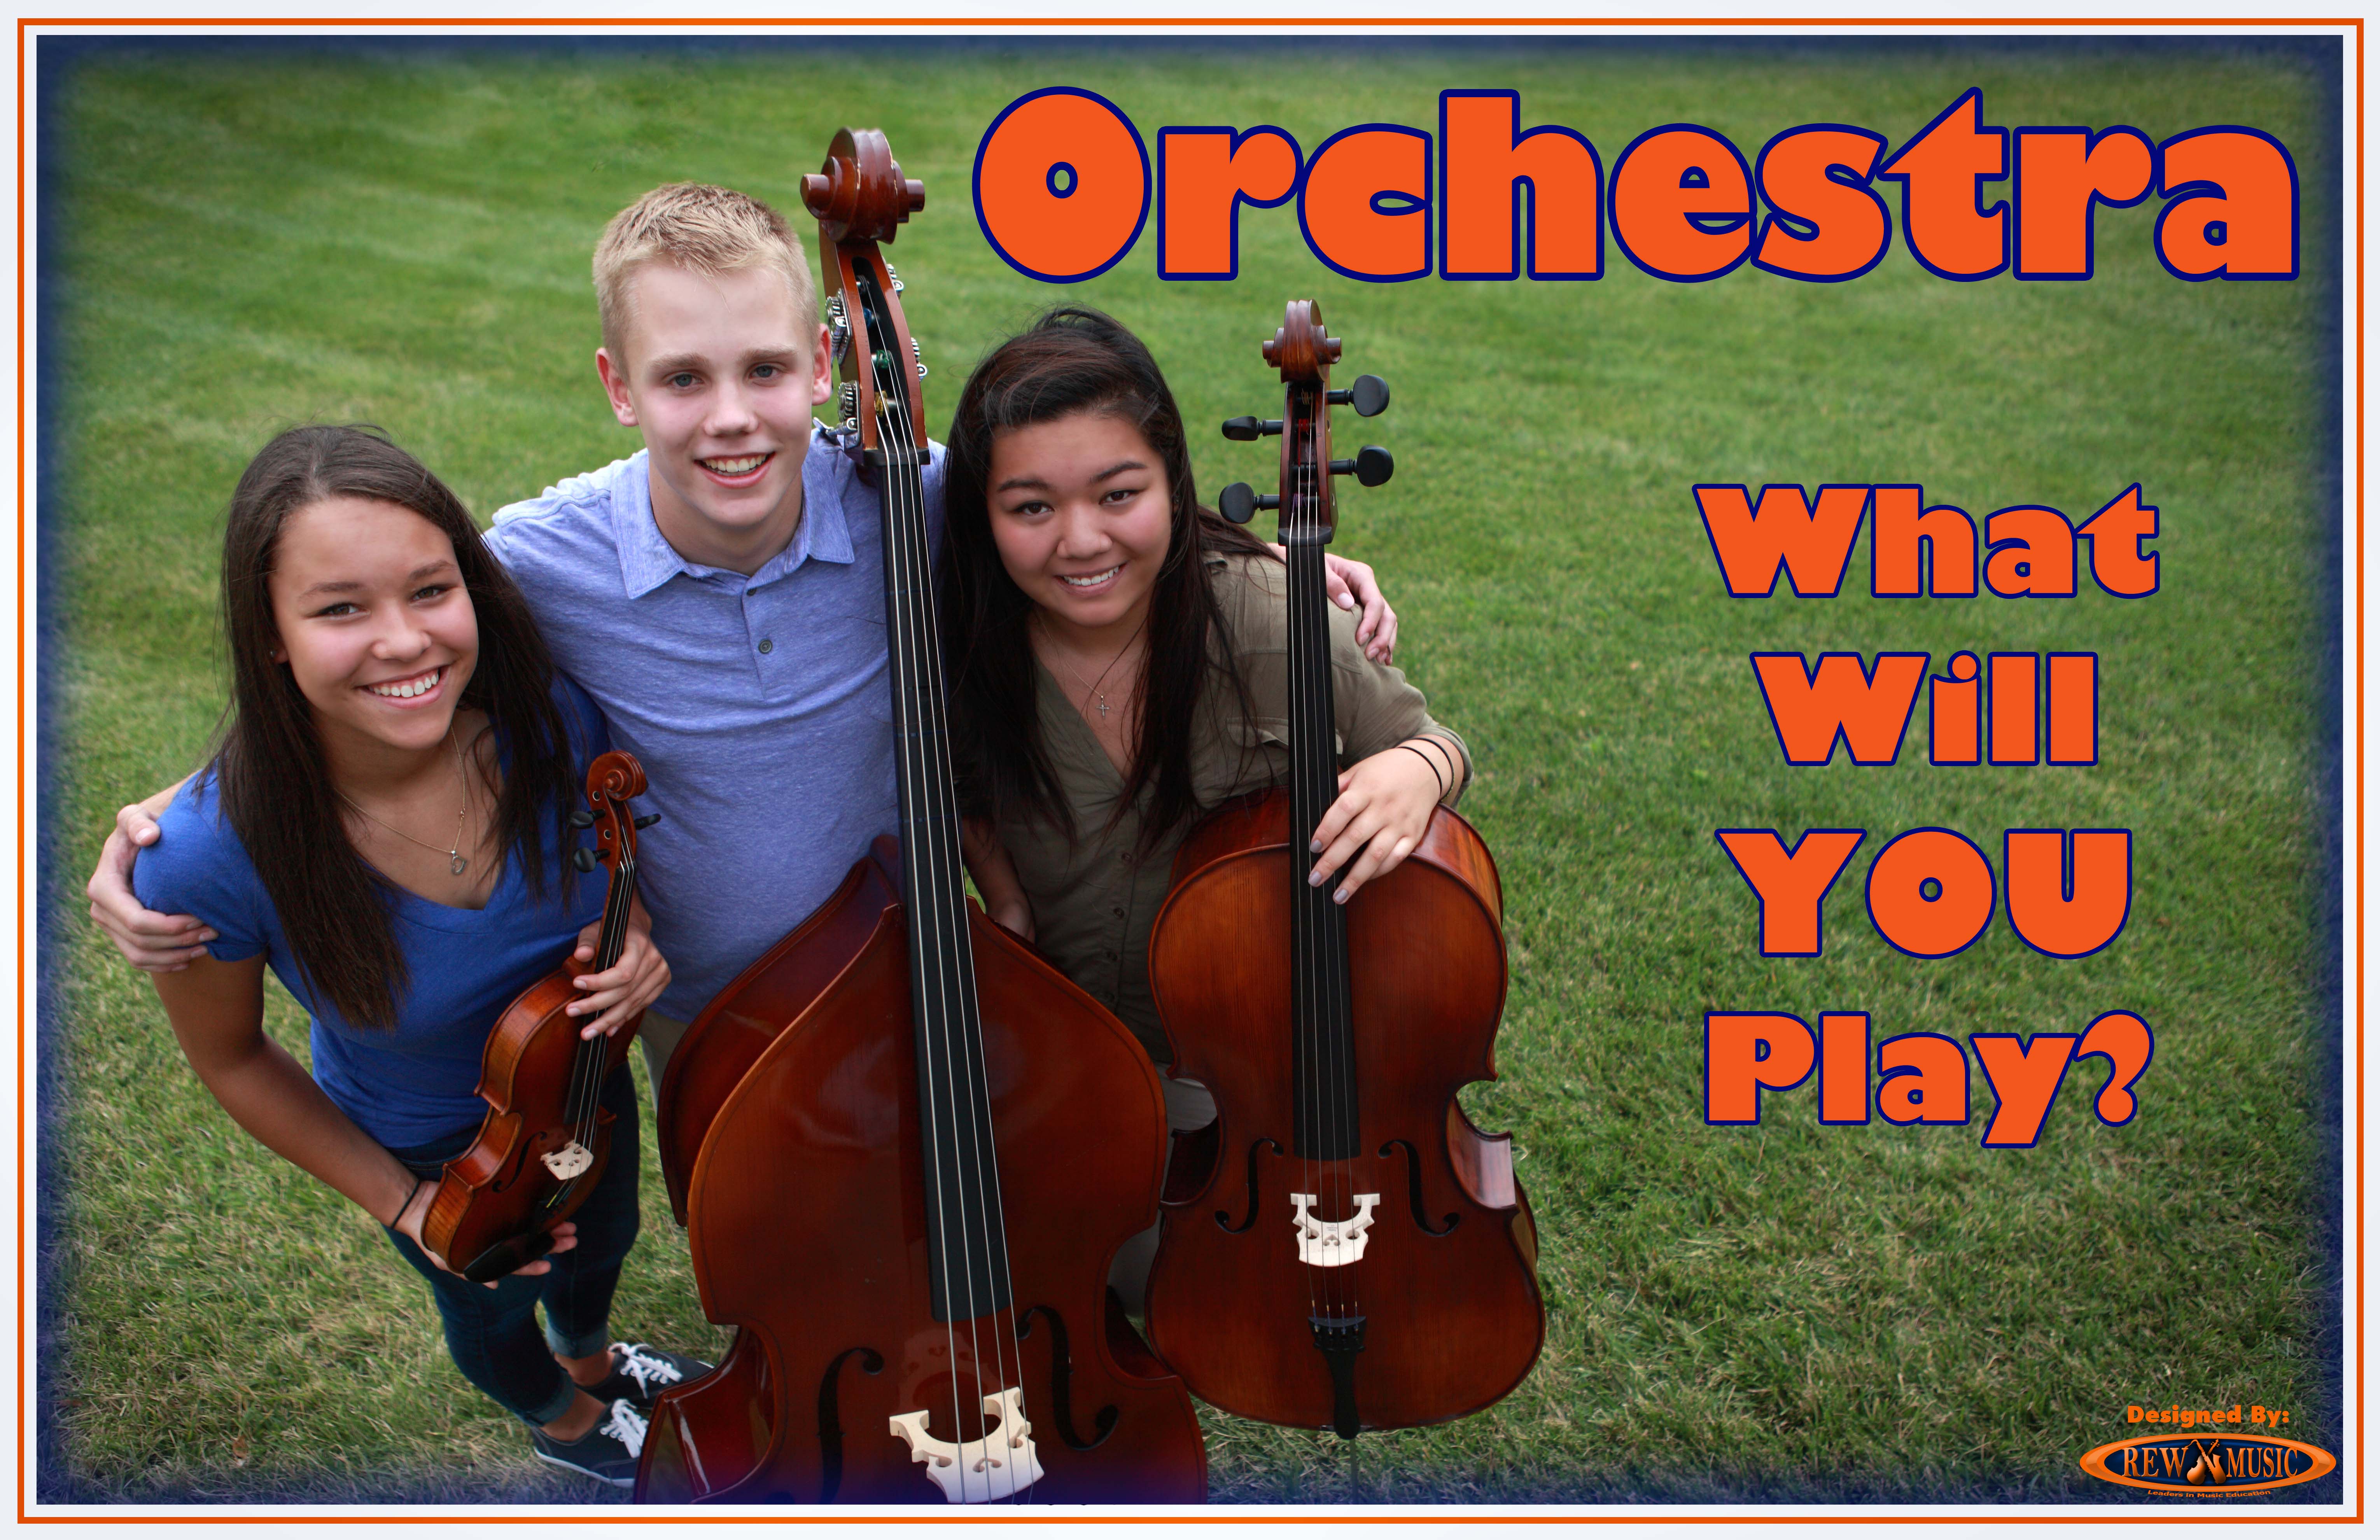 Join the School Orchestra Strings What Will You Play Group Grass